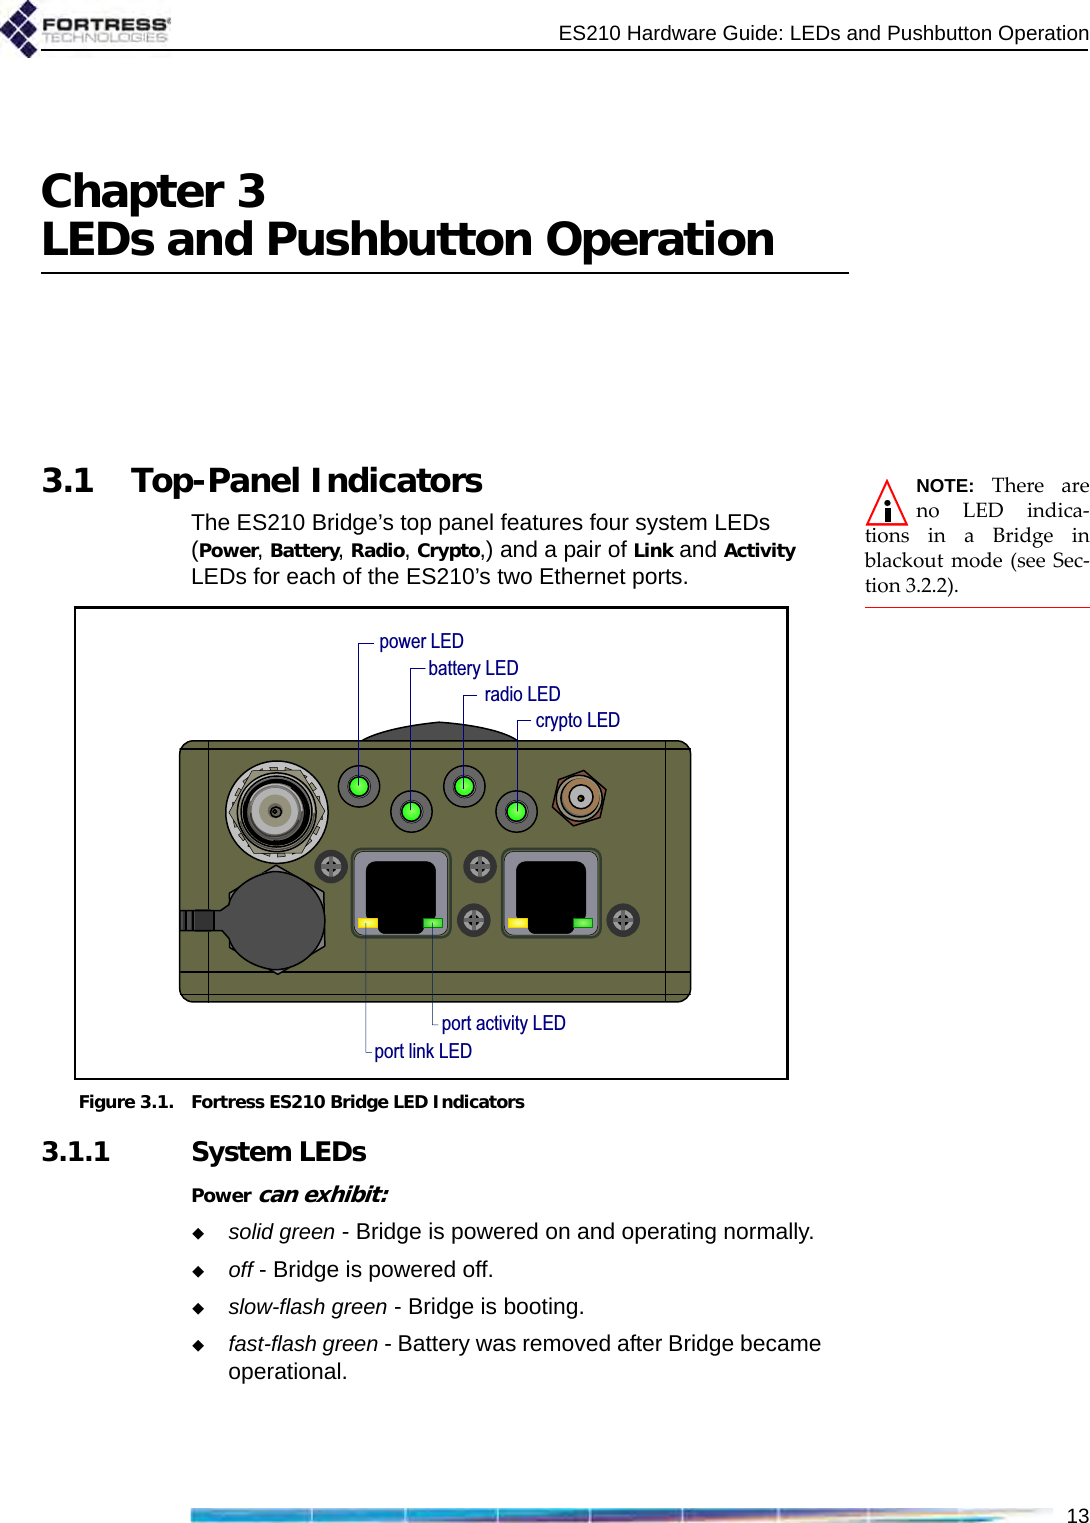 ES210 Hardware Guide: LEDs and Pushbutton Operation13Chapter 3LEDs and Pushbutton OperationNOTE: There areno LED indica-tions in a Bridge inblackout mode (see Sec-tion 3.2.2).3.1 Top-Panel IndicatorsThe ES210 Bridge’s top panel features four system LEDs (Power, Battery, Radio, Crypto,) and a pair of Link and Activity LEDs for each of the ES210’s two Ethernet ports.Figure 3.1. Fortress ES210 Bridge LED Indicators3.1.1 System LEDsPower can exhibit:solid green - Bridge is powered on and operating normally.off - Bridge is powered off.slow-flash green - Bridge is booting.fast-flash green - Battery was removed after Bridge became operational.power LEDcrypto LEDbattery LEDradio LEDport activity LEDport link LED